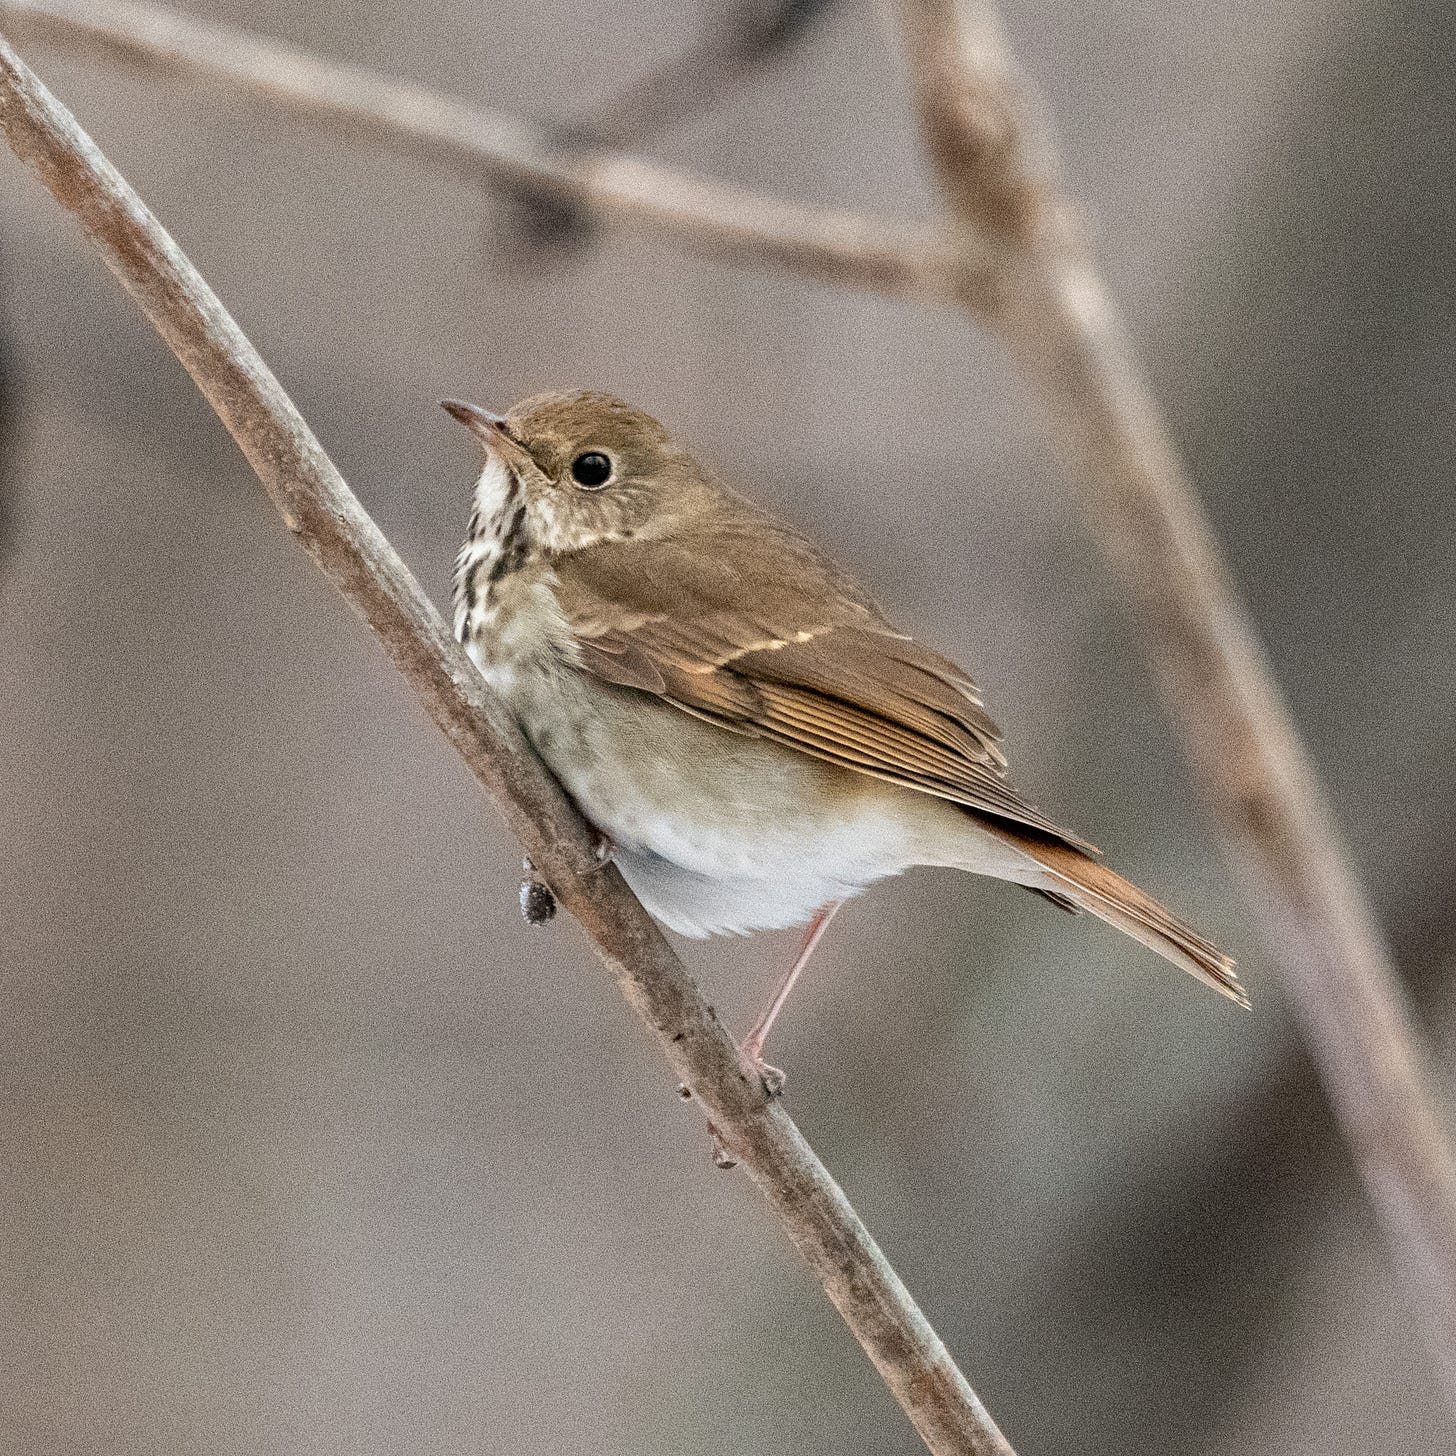 A hermit thrush, perched, in profile; there is a wound or a deformation along its upper beak